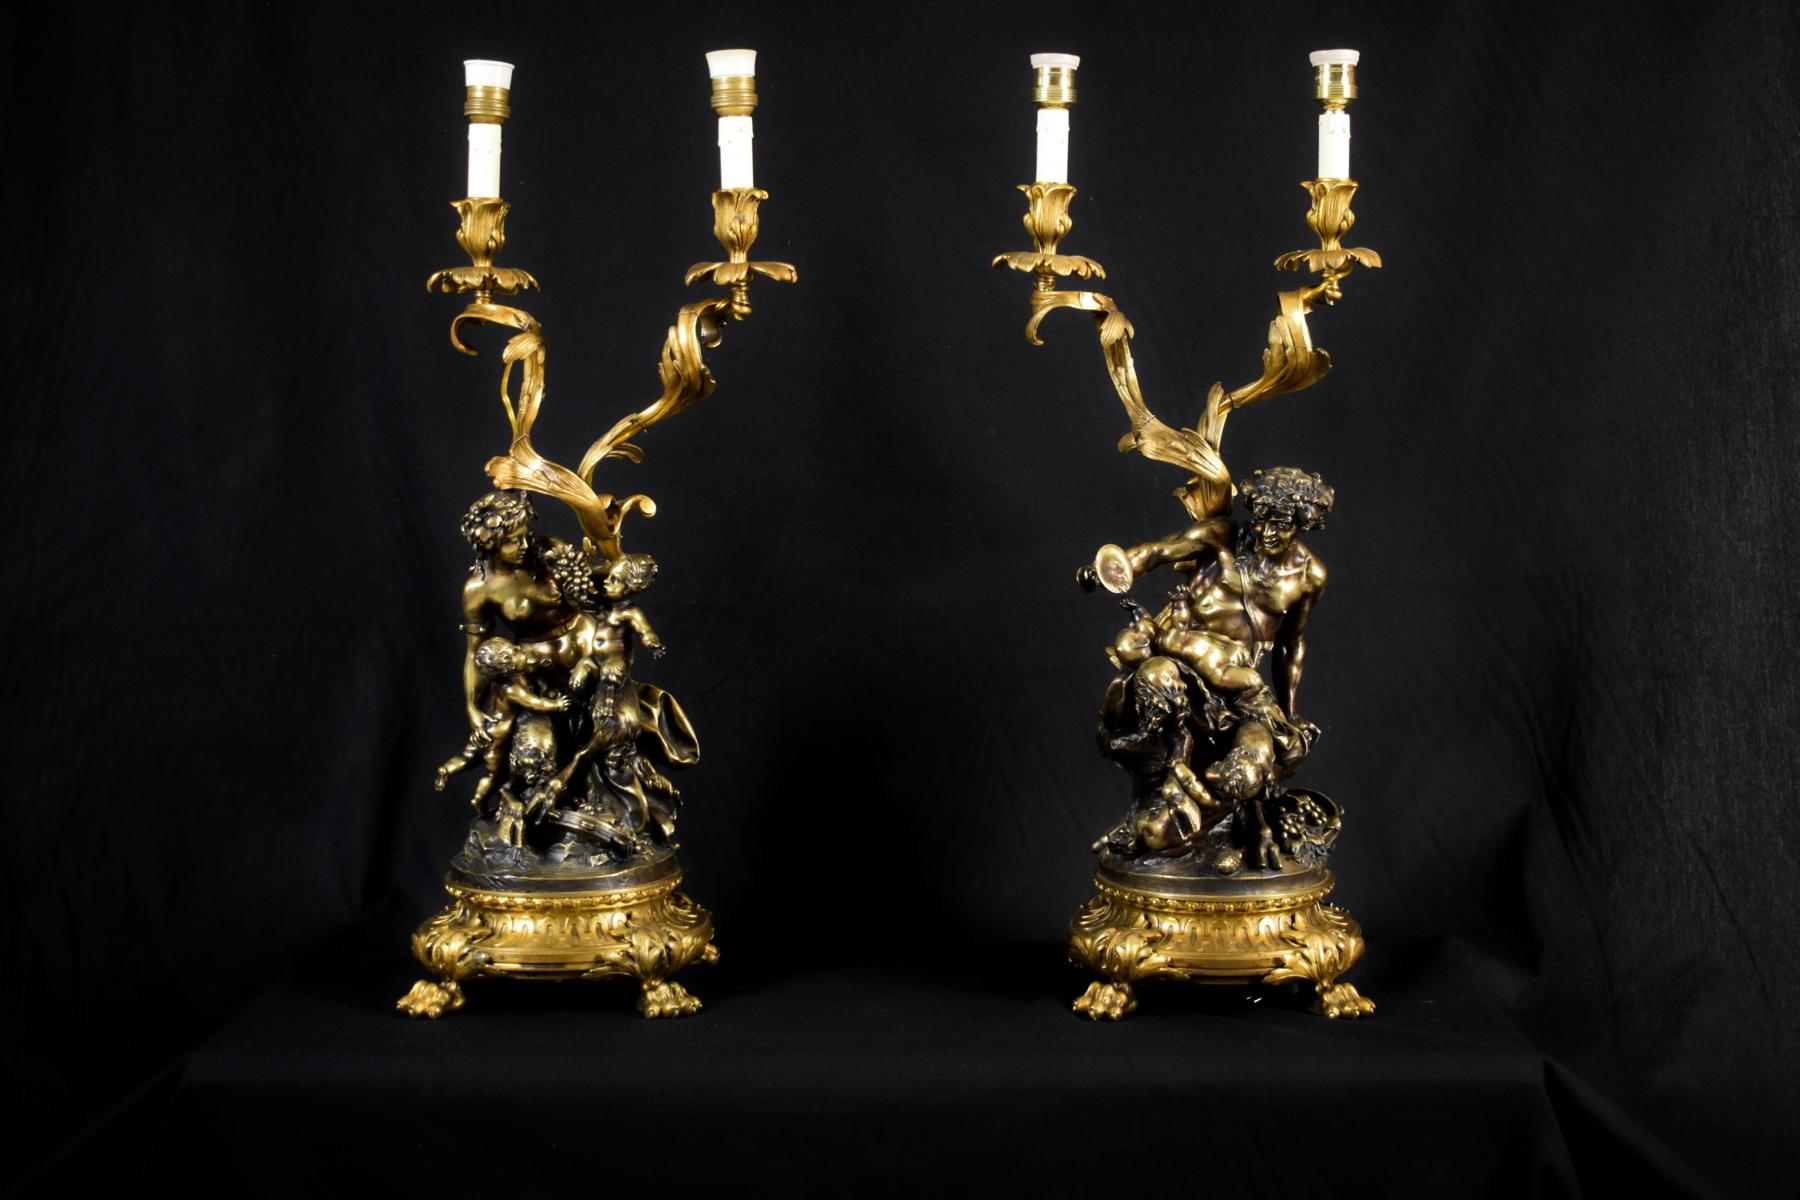 Pair of important candlesticks in gilt and patinated bronze, lamp mounted.
Depicting Bacchanal of Satyrs and Signed Clodion.
France 19th Century 
Measures h only candlesticks 65 x p 27 cm; h with lampshade 86 cm

This pair of important two lights